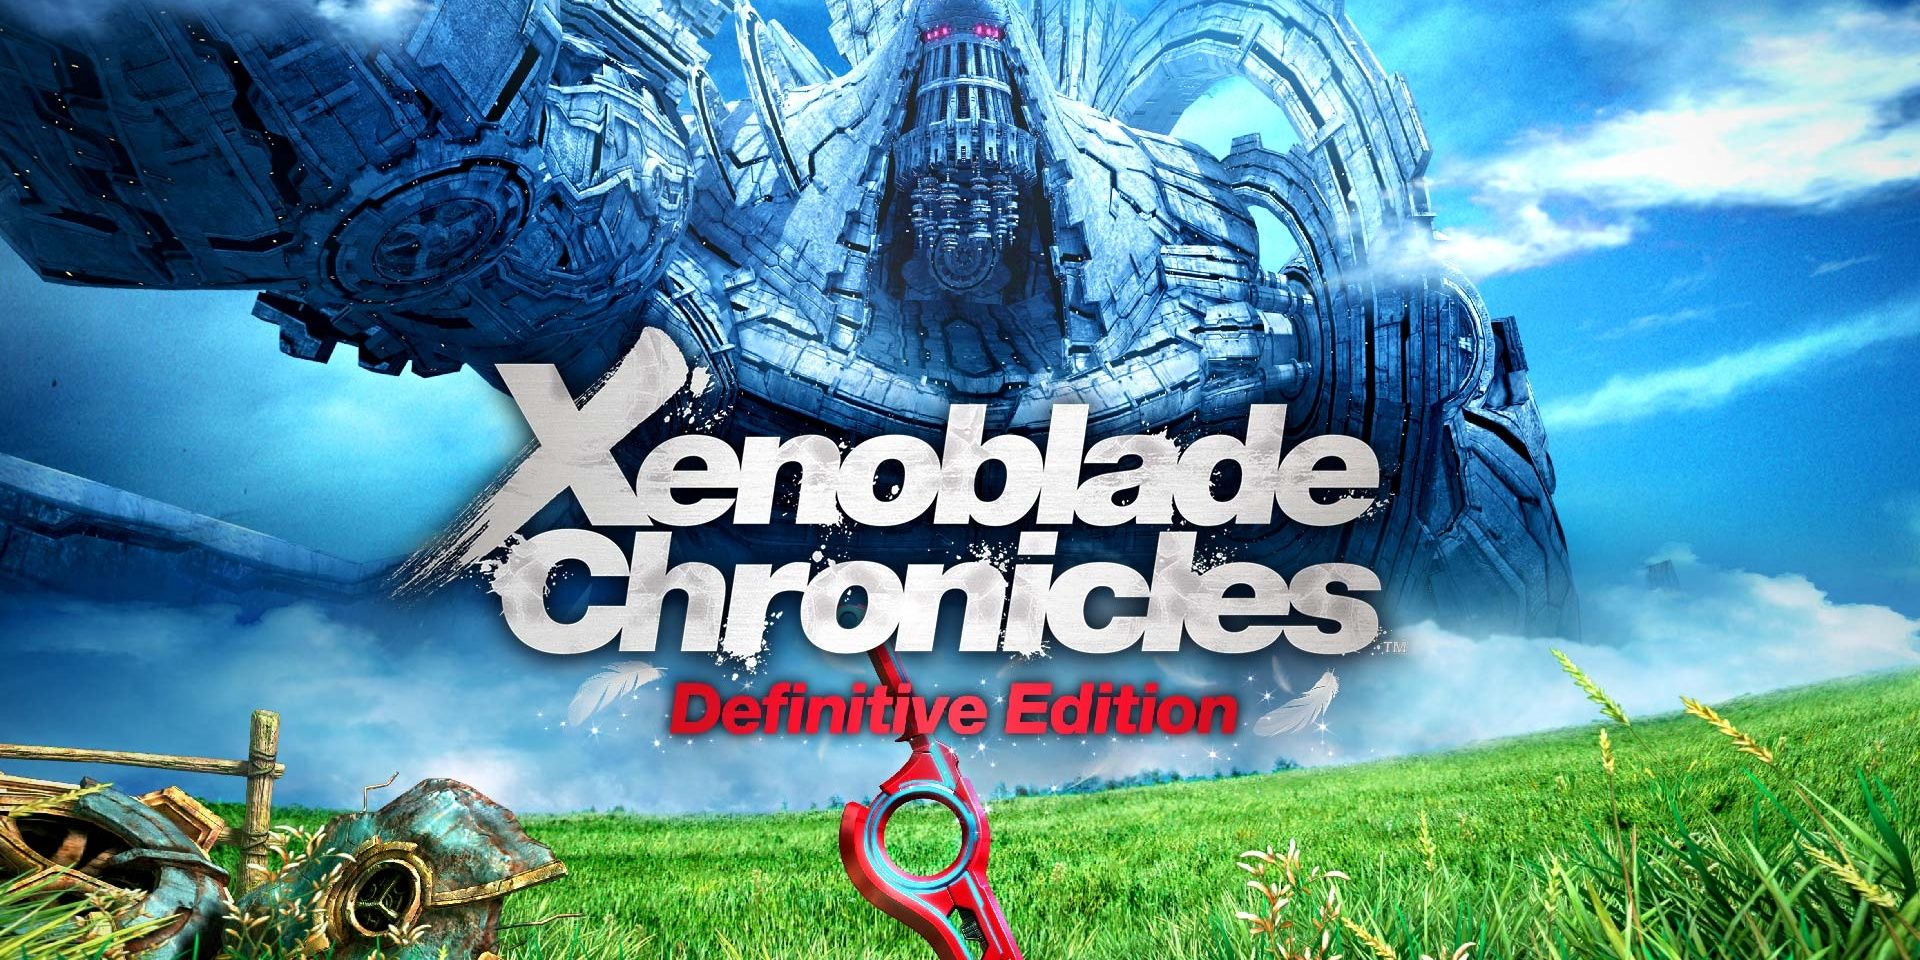 Cover Art for Xenoblade Chronicles Definitive Edition Bionis in the background of grassy landscape with Monado sword stuck into the ground